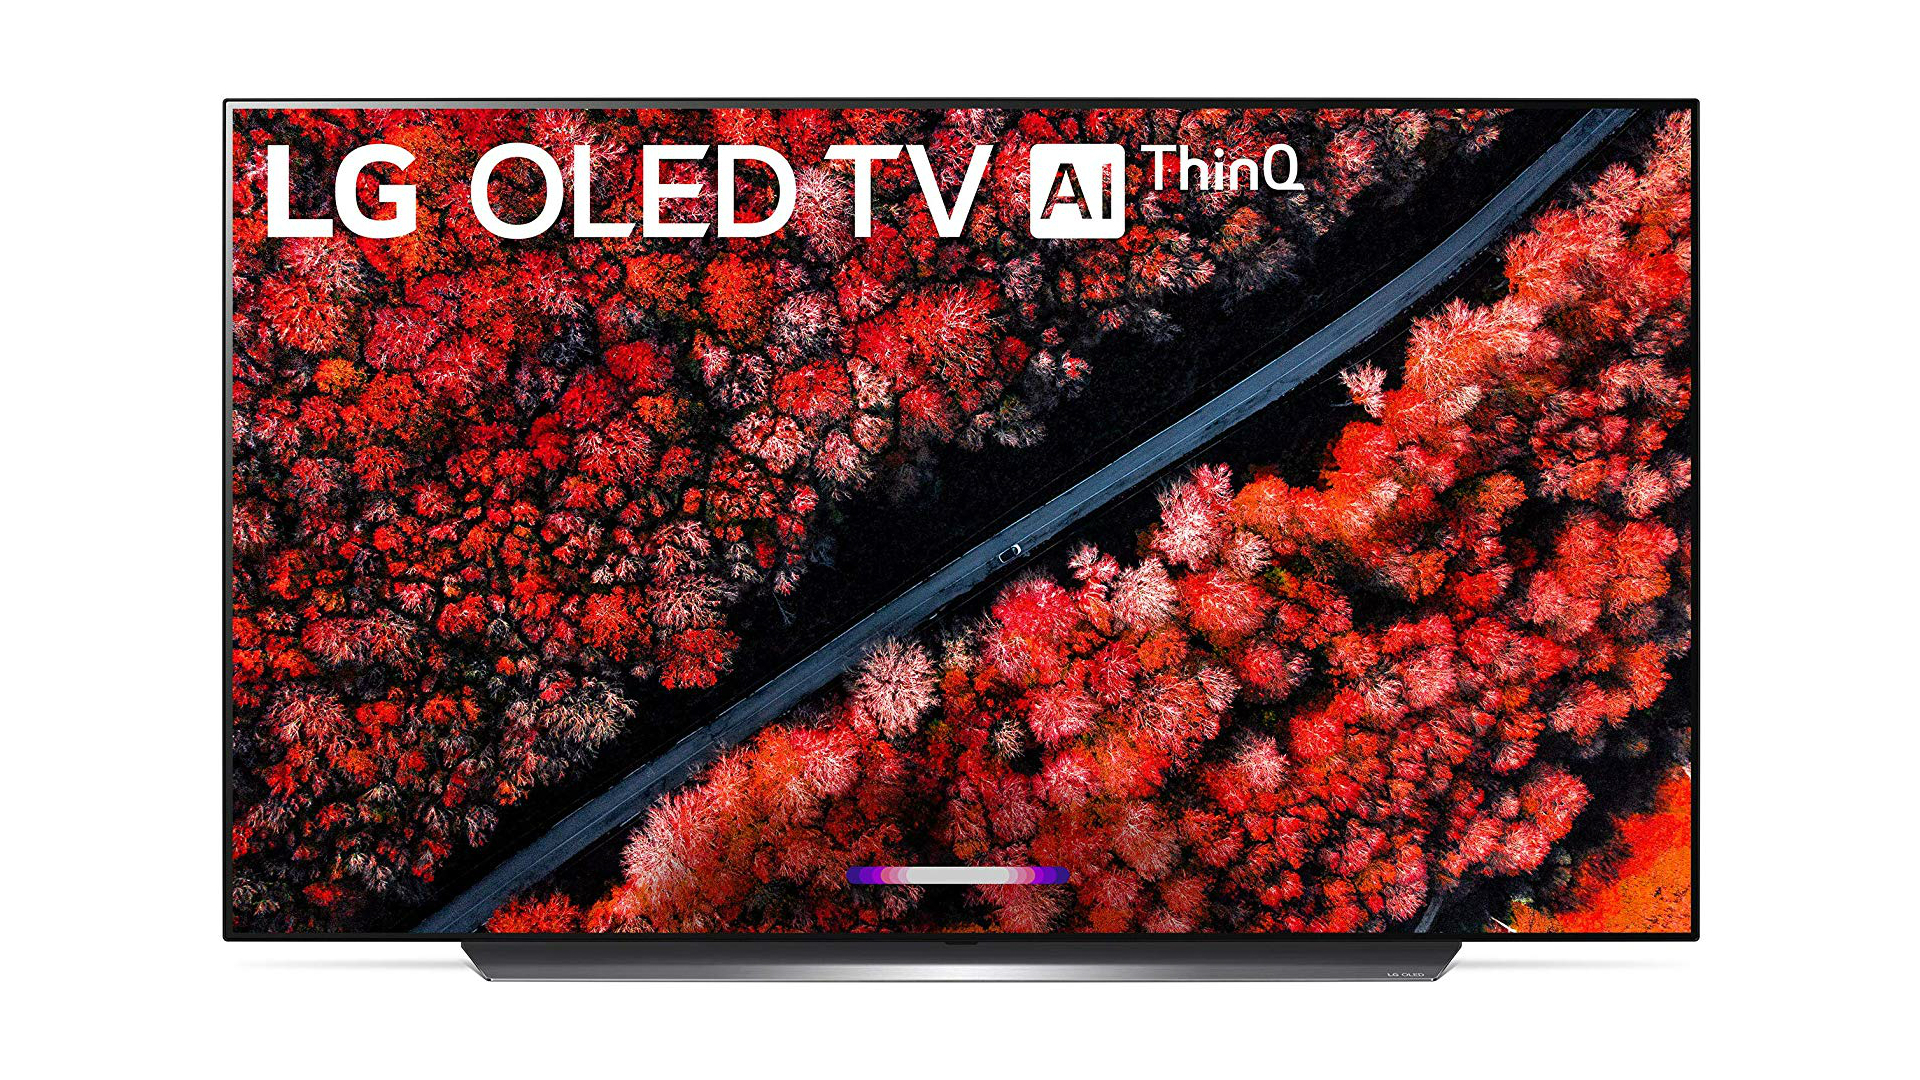 LG C9 Series - one of the best 75-inch tvs